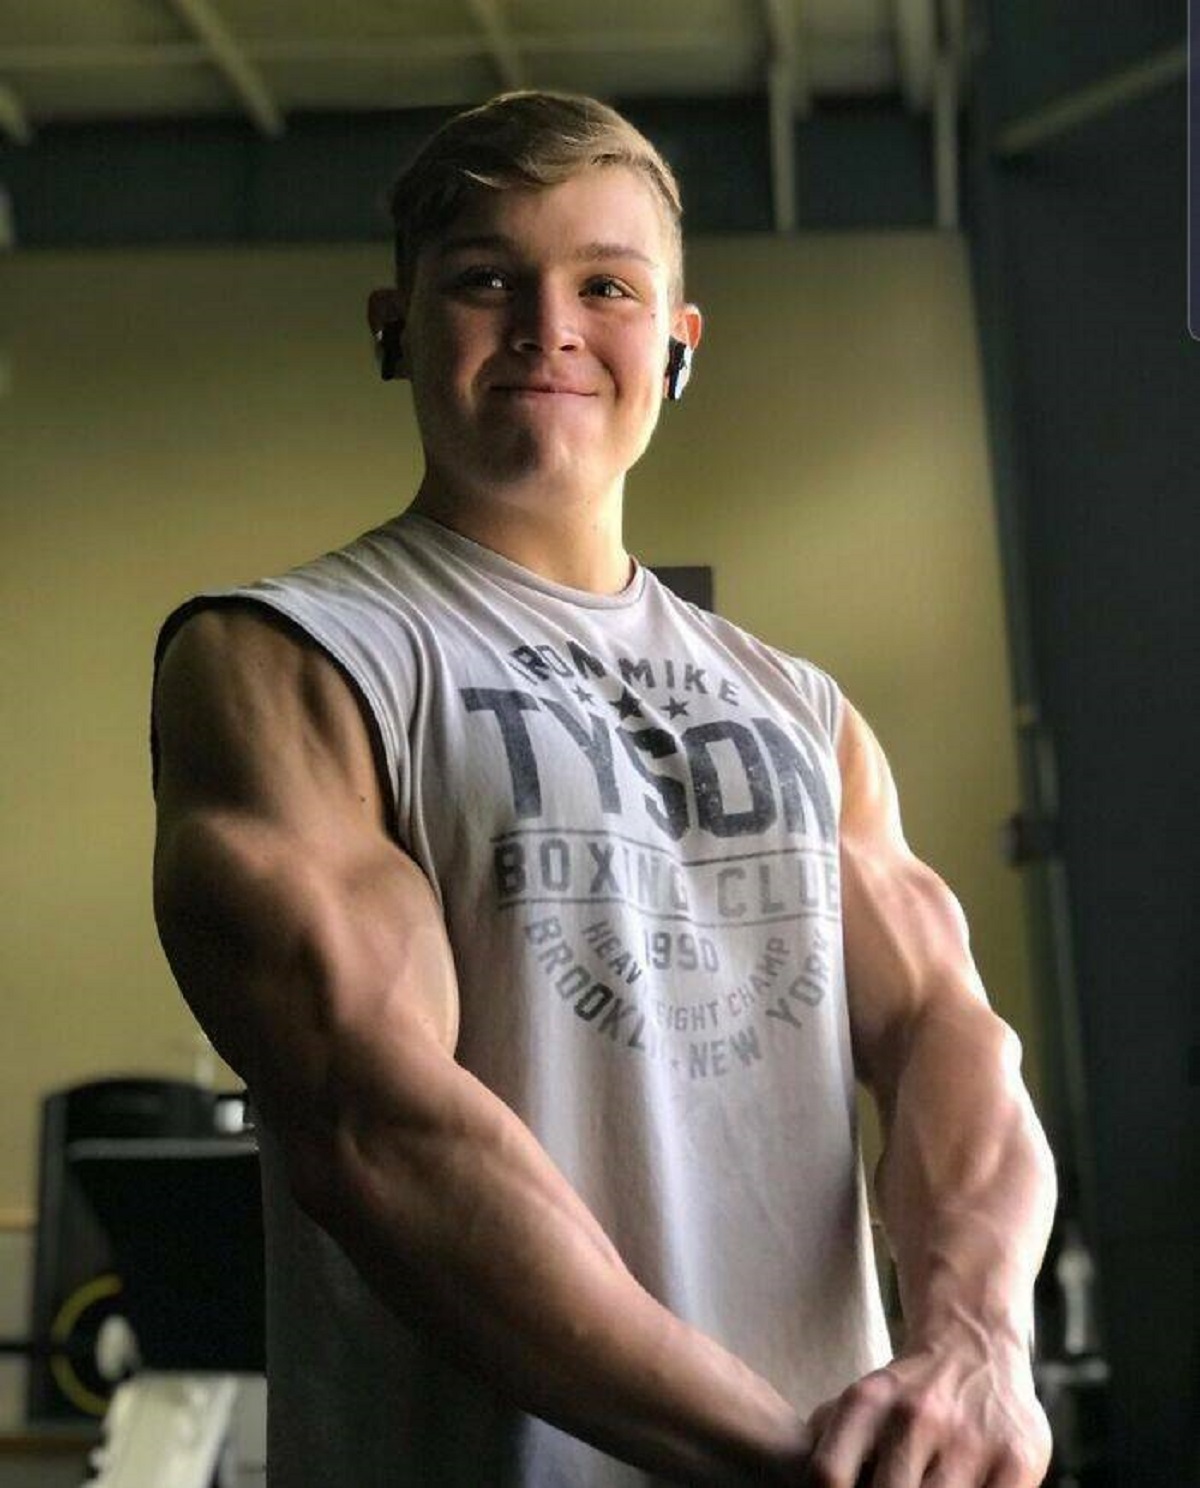 "This Bodybuilder With A 13 Year Old's Face"